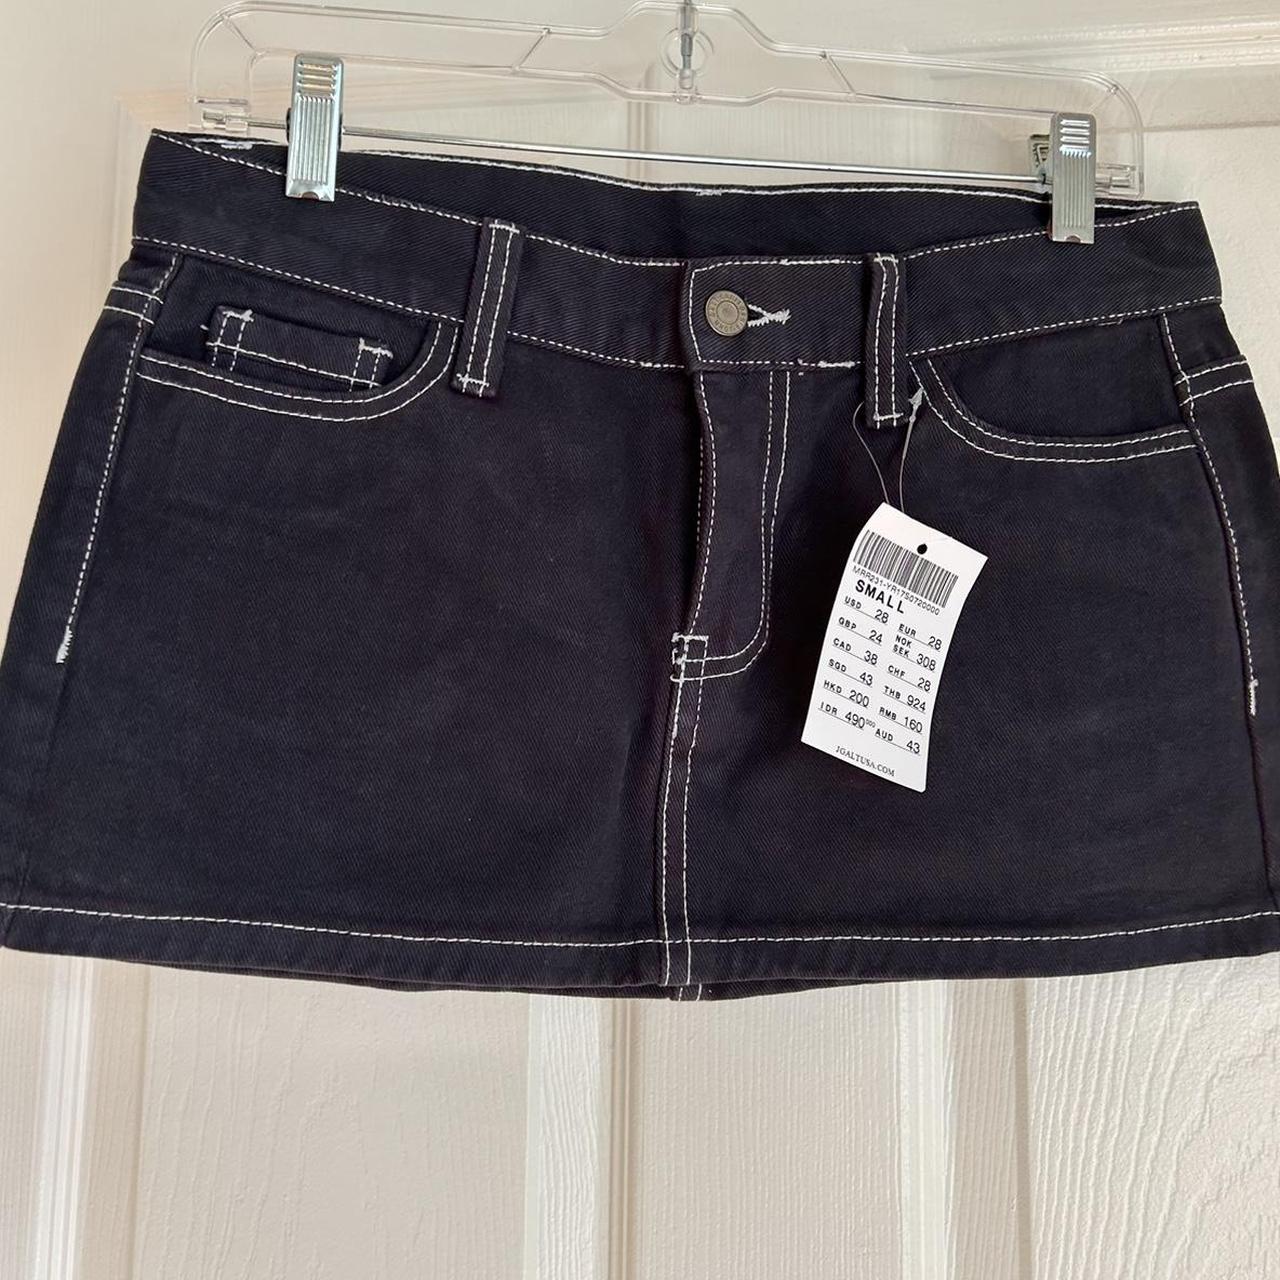 New with tags black mini skirt by Brandy Melville.... - Depop